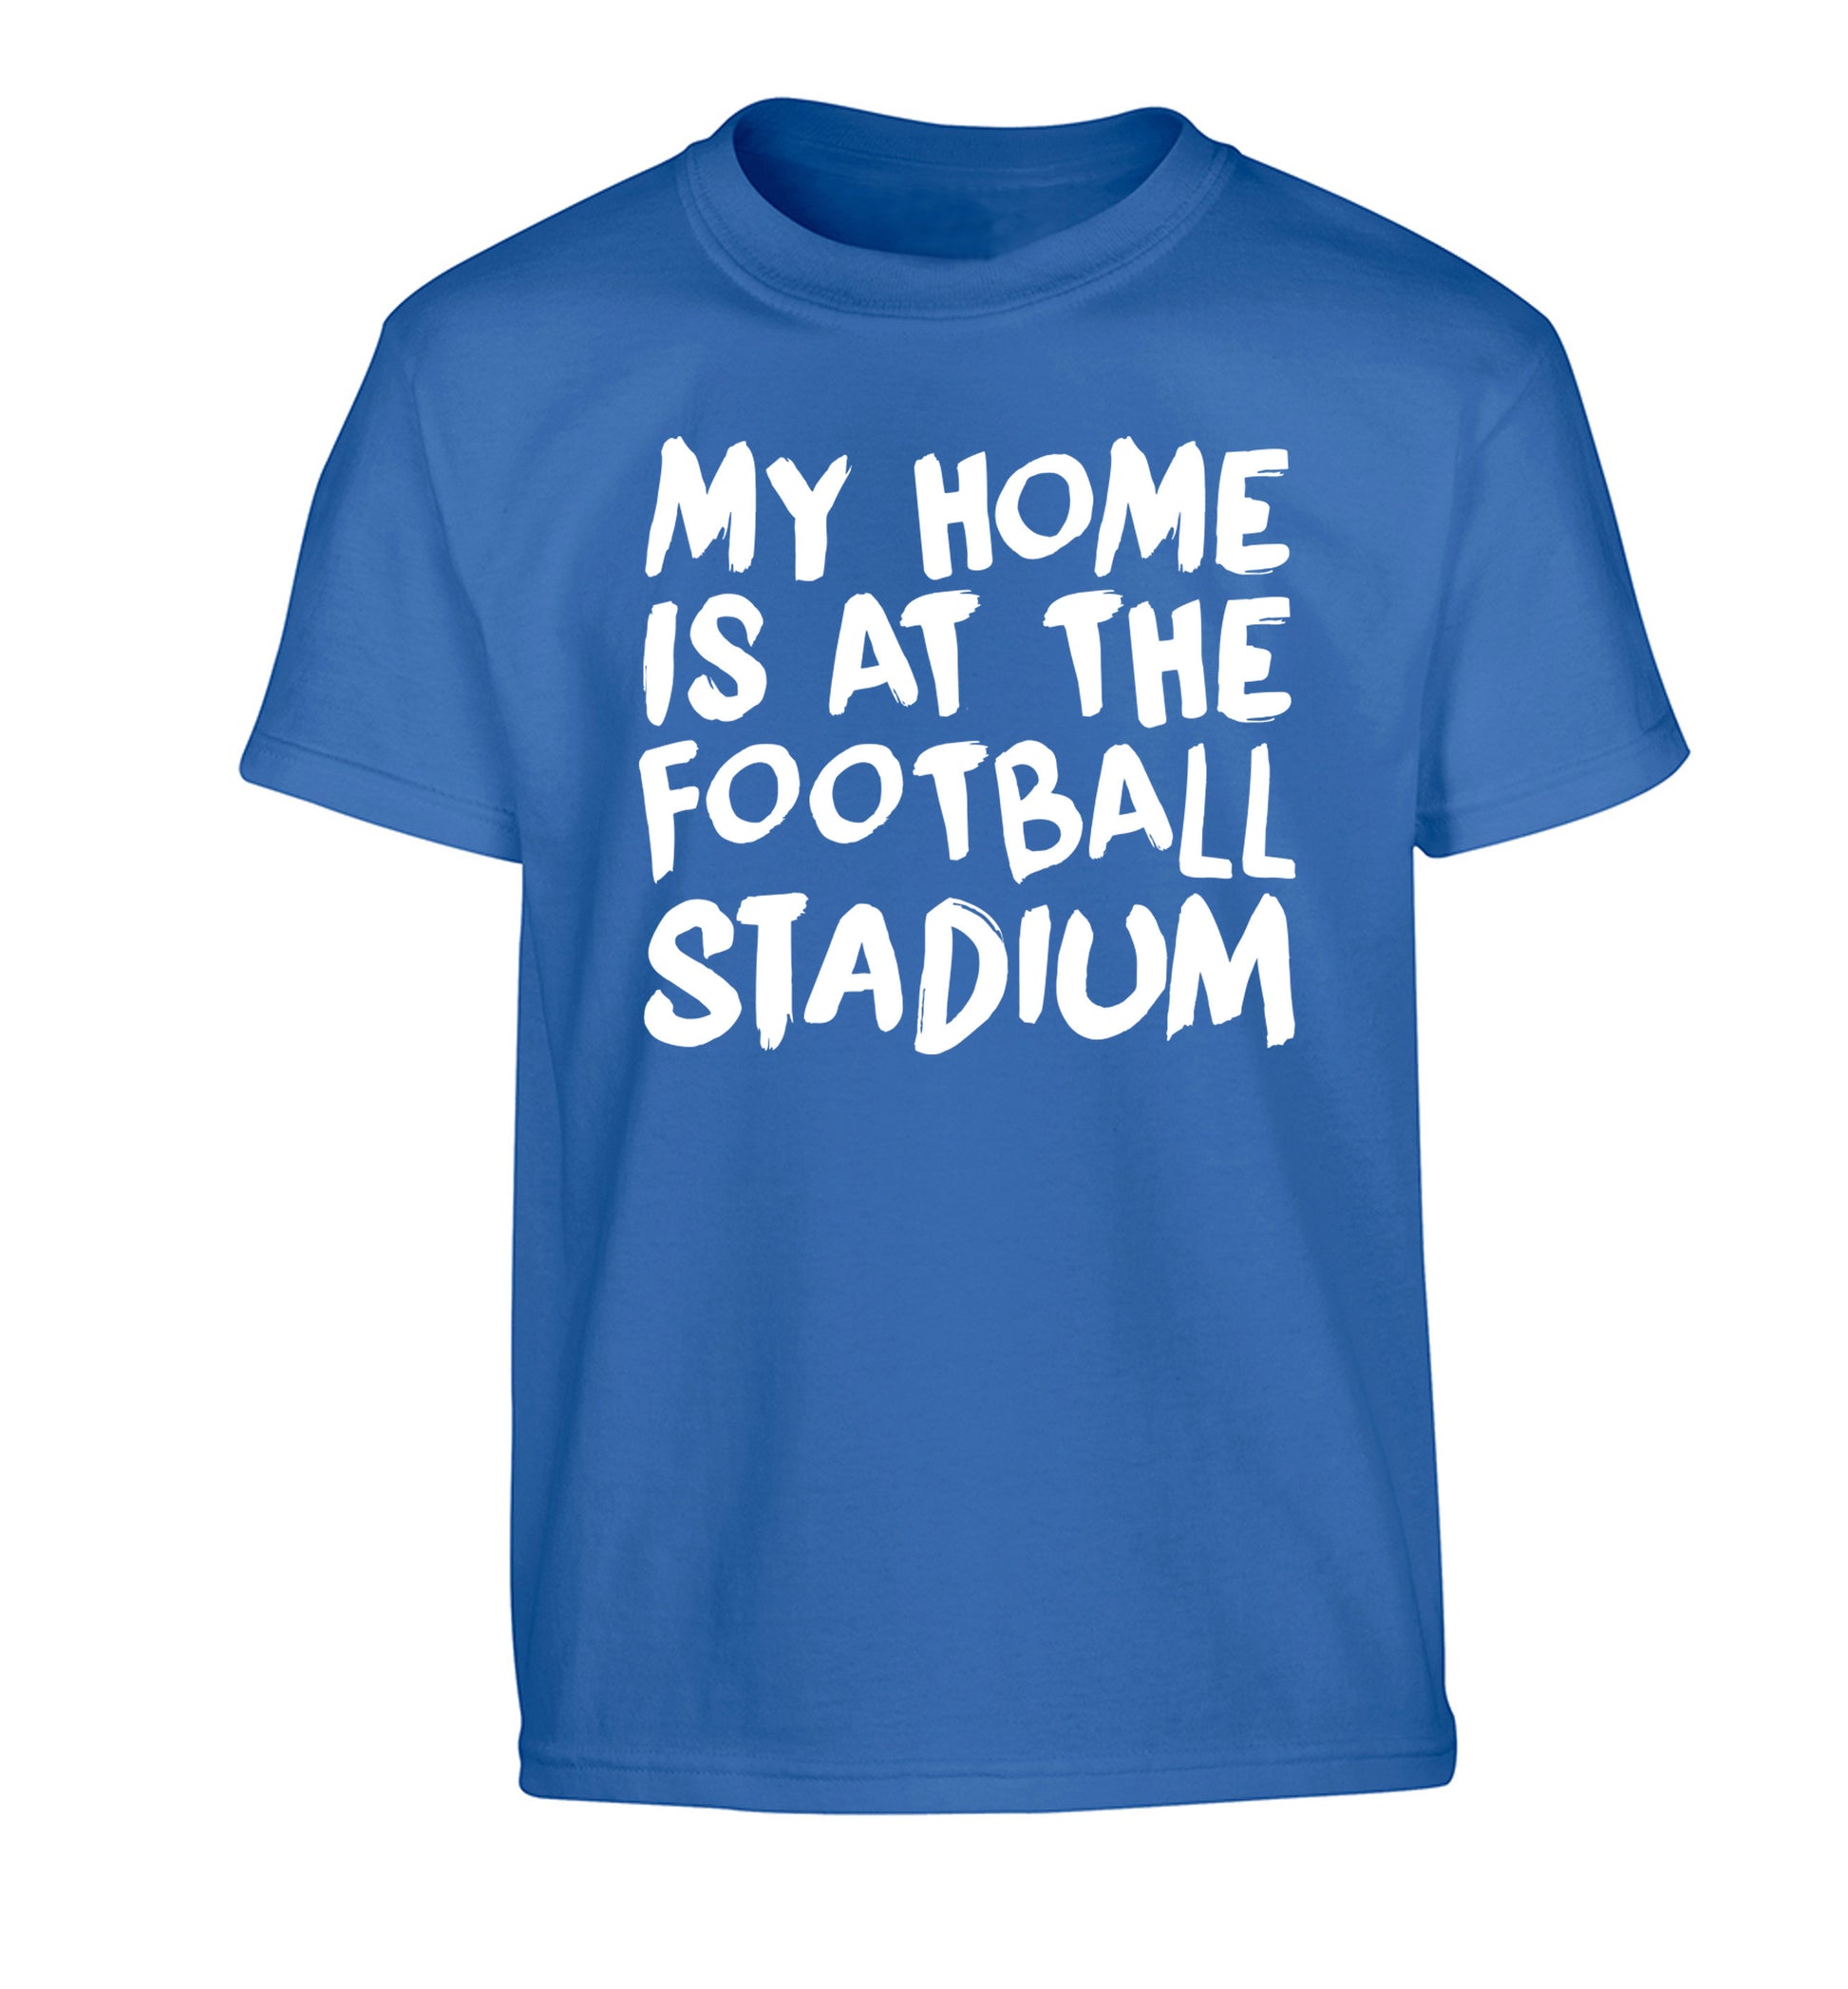 My home is at the football stadium Children's blue Tshirt 12-14 Years